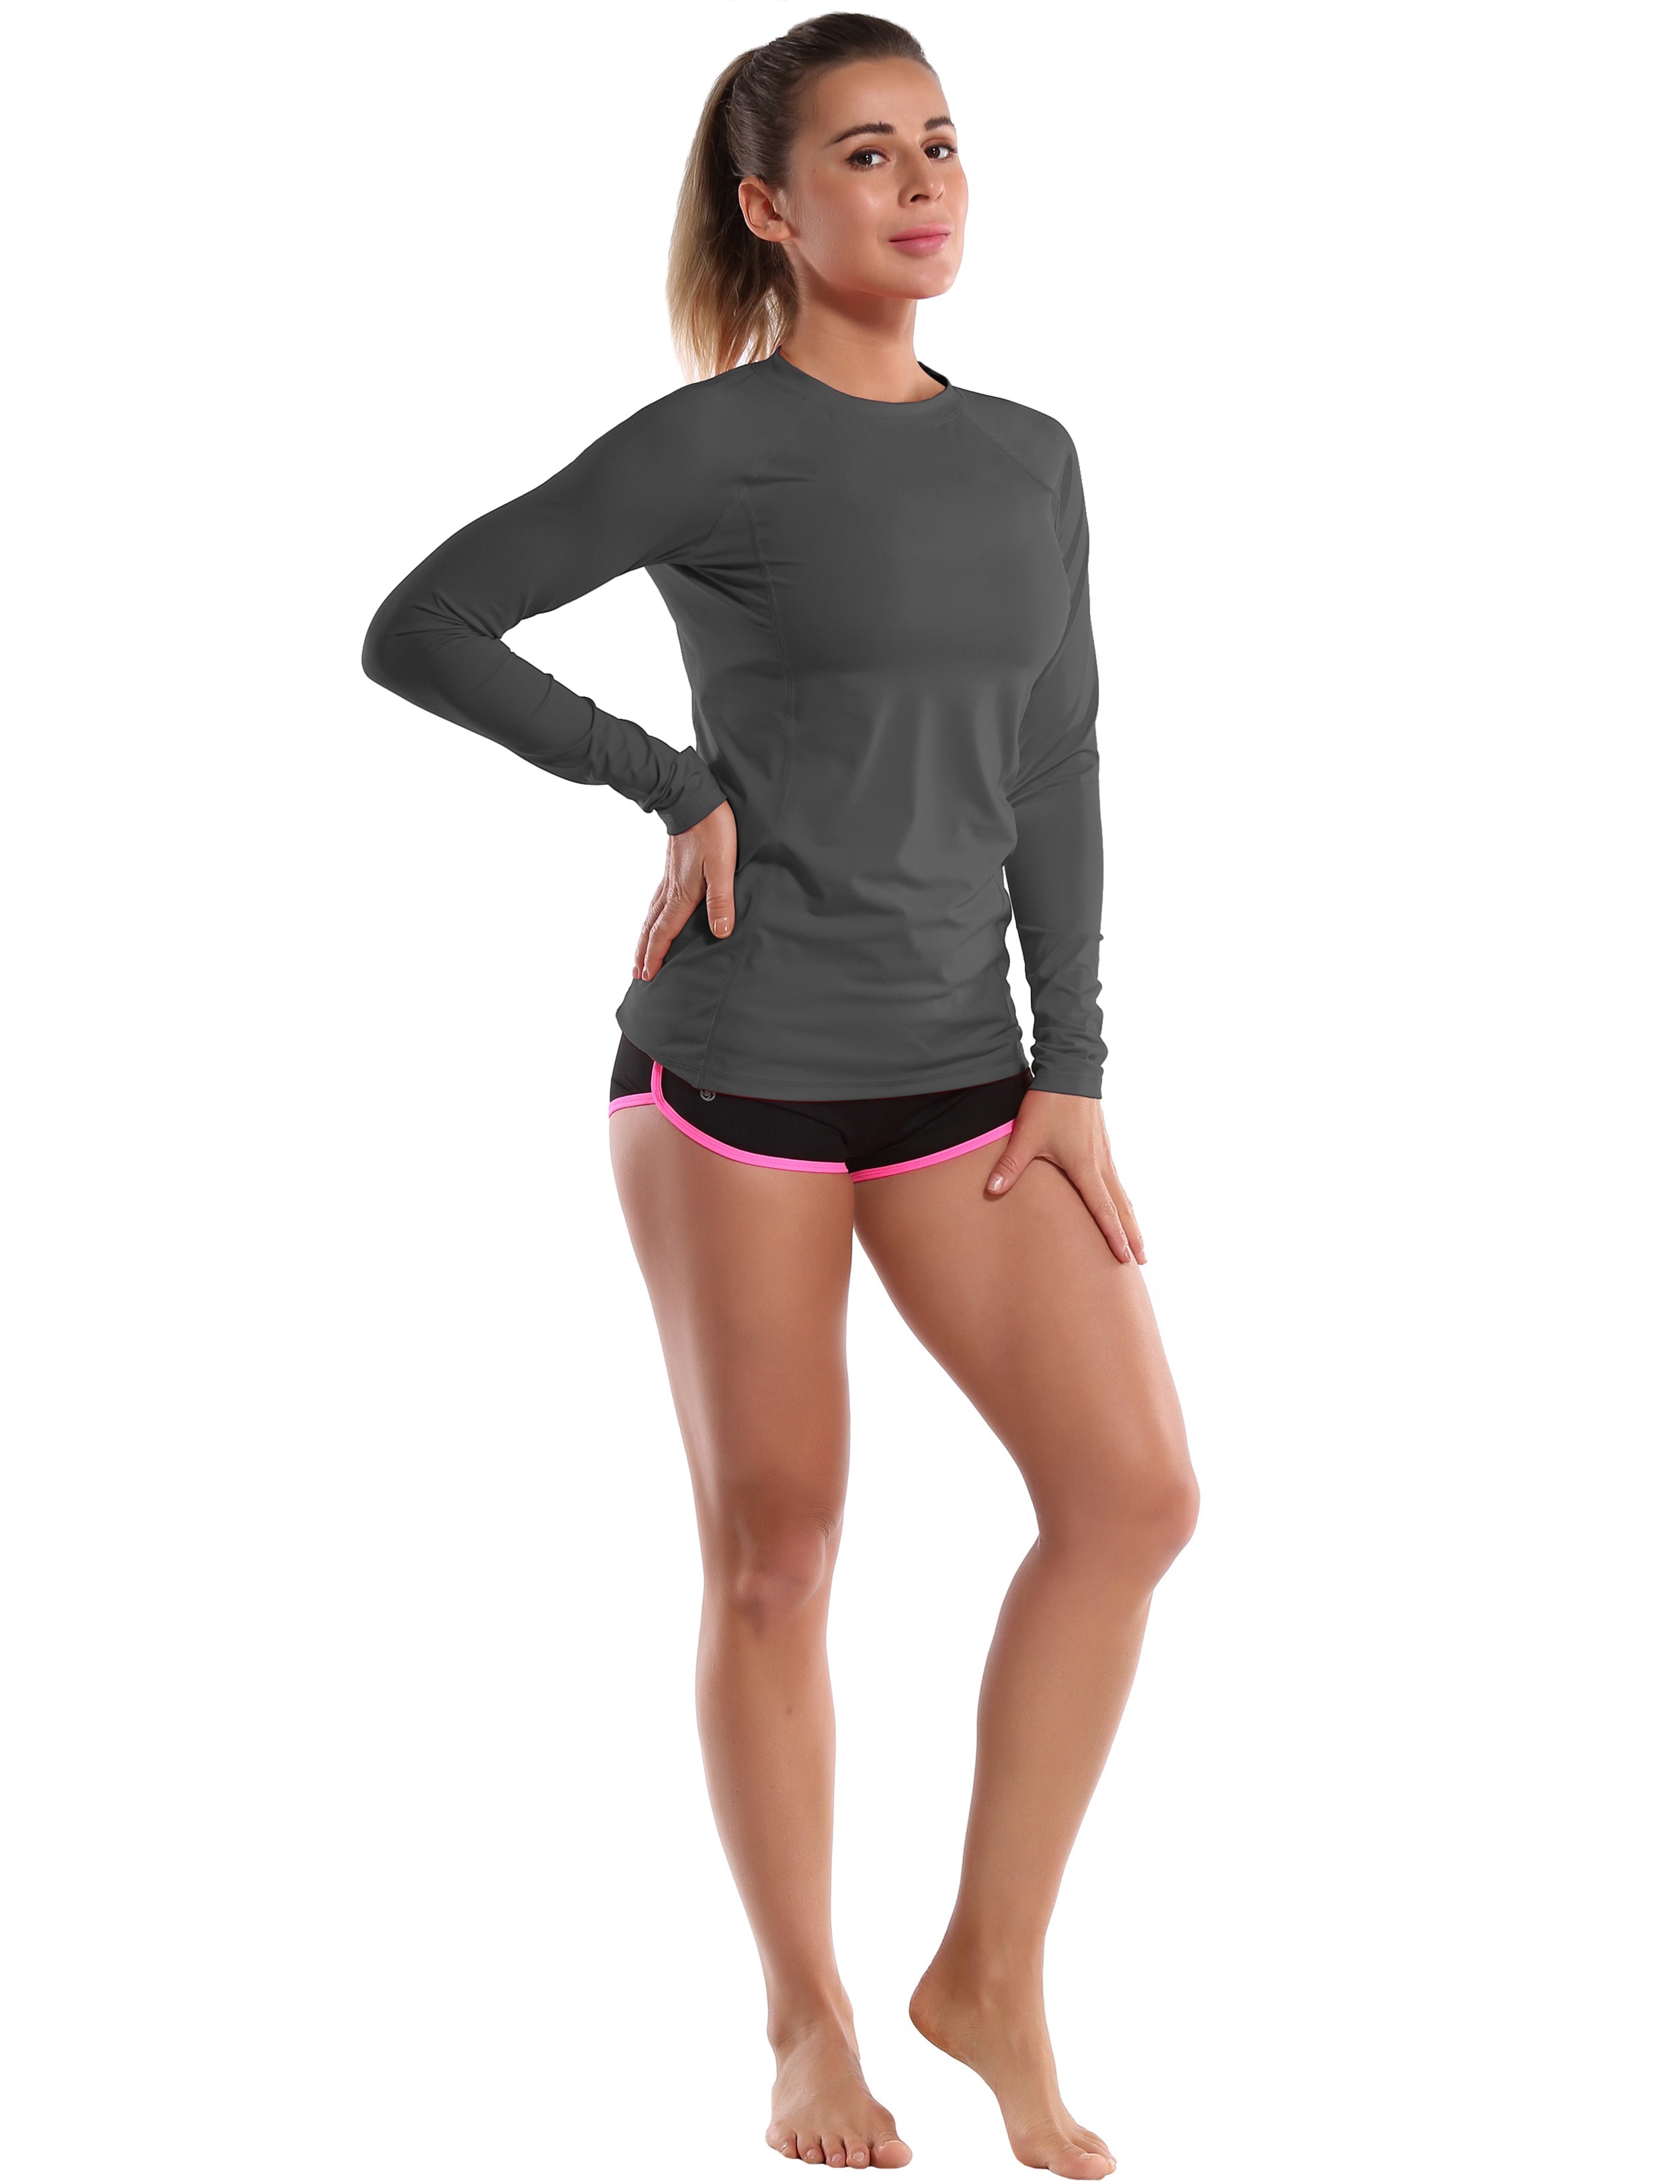 Long Sleeve UPF 50+ Rashguard shadowcharcoal 84%Polyester/16%Spandex Fitted design Dries ultra-fast UV Protection: UPF 50 sun protection